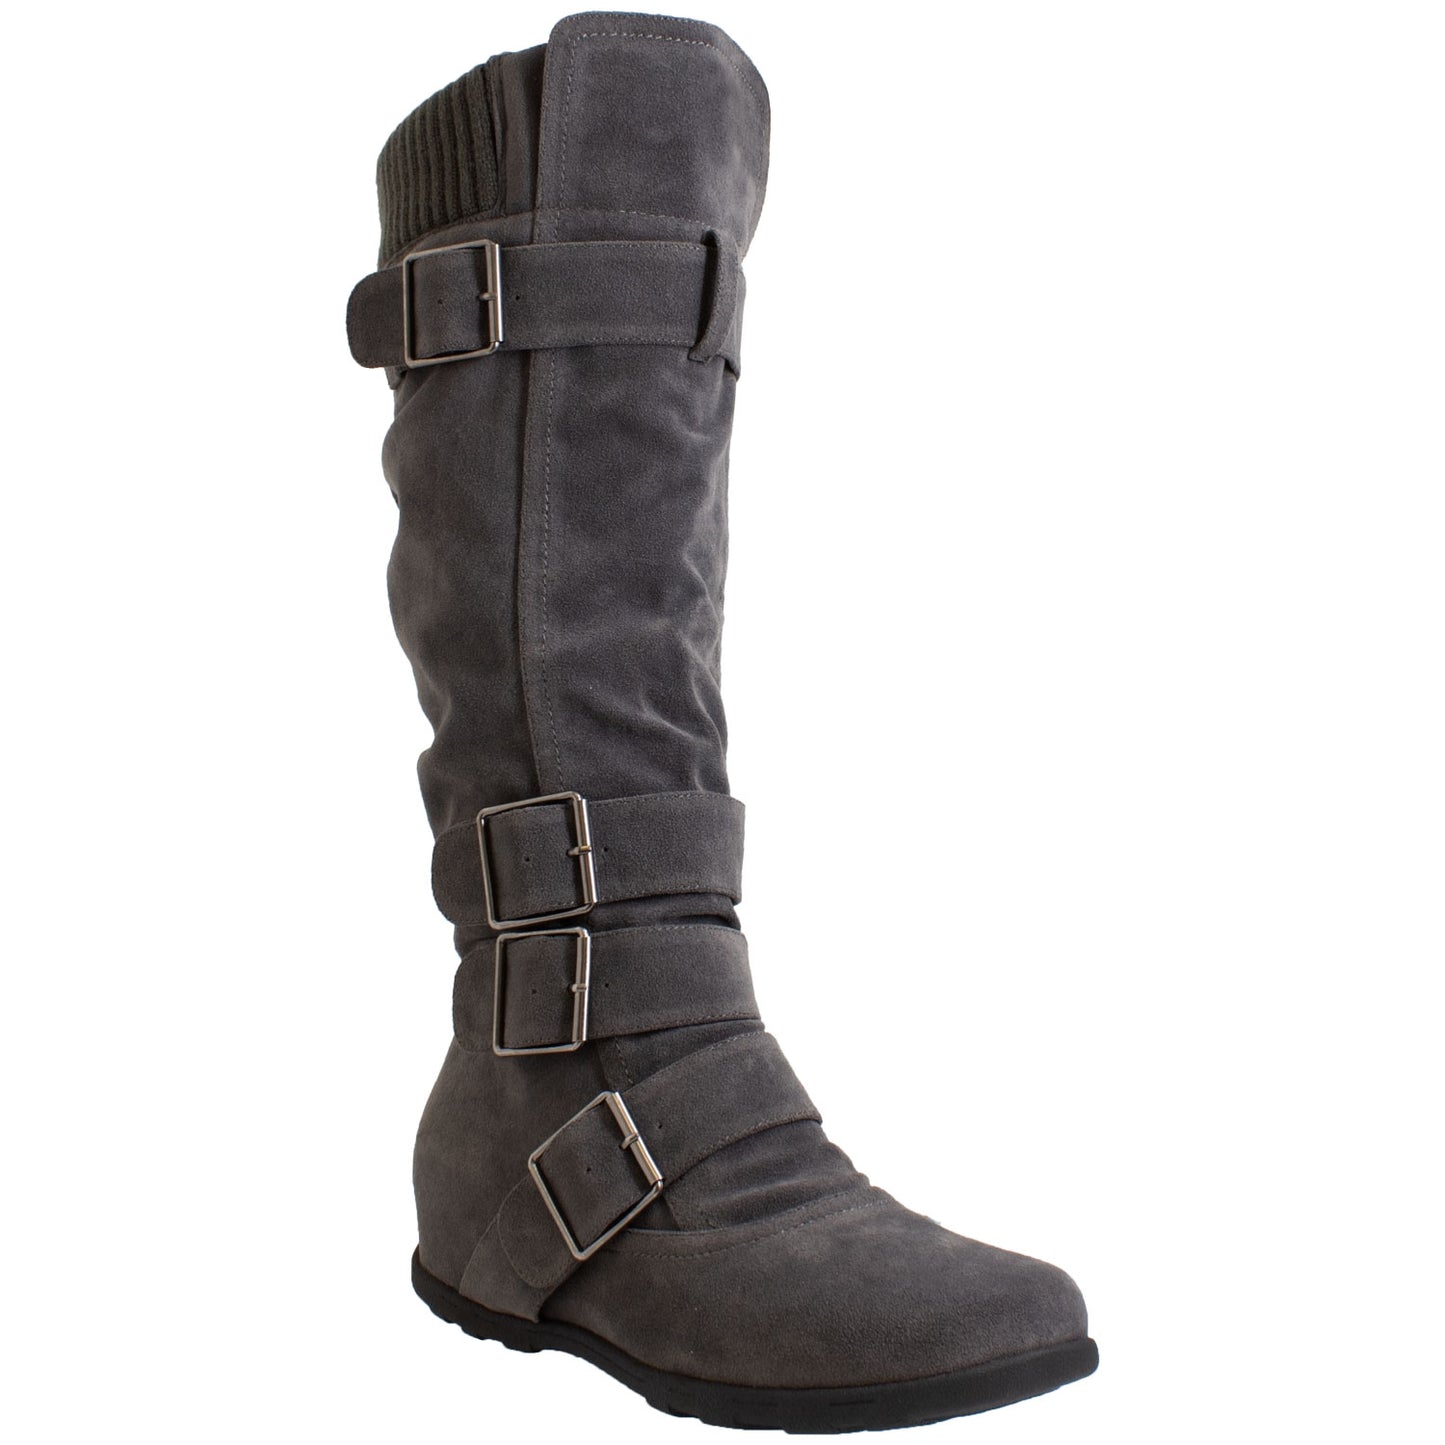 Generation Y Women's Knee High Boots Strappy Buckles Combat